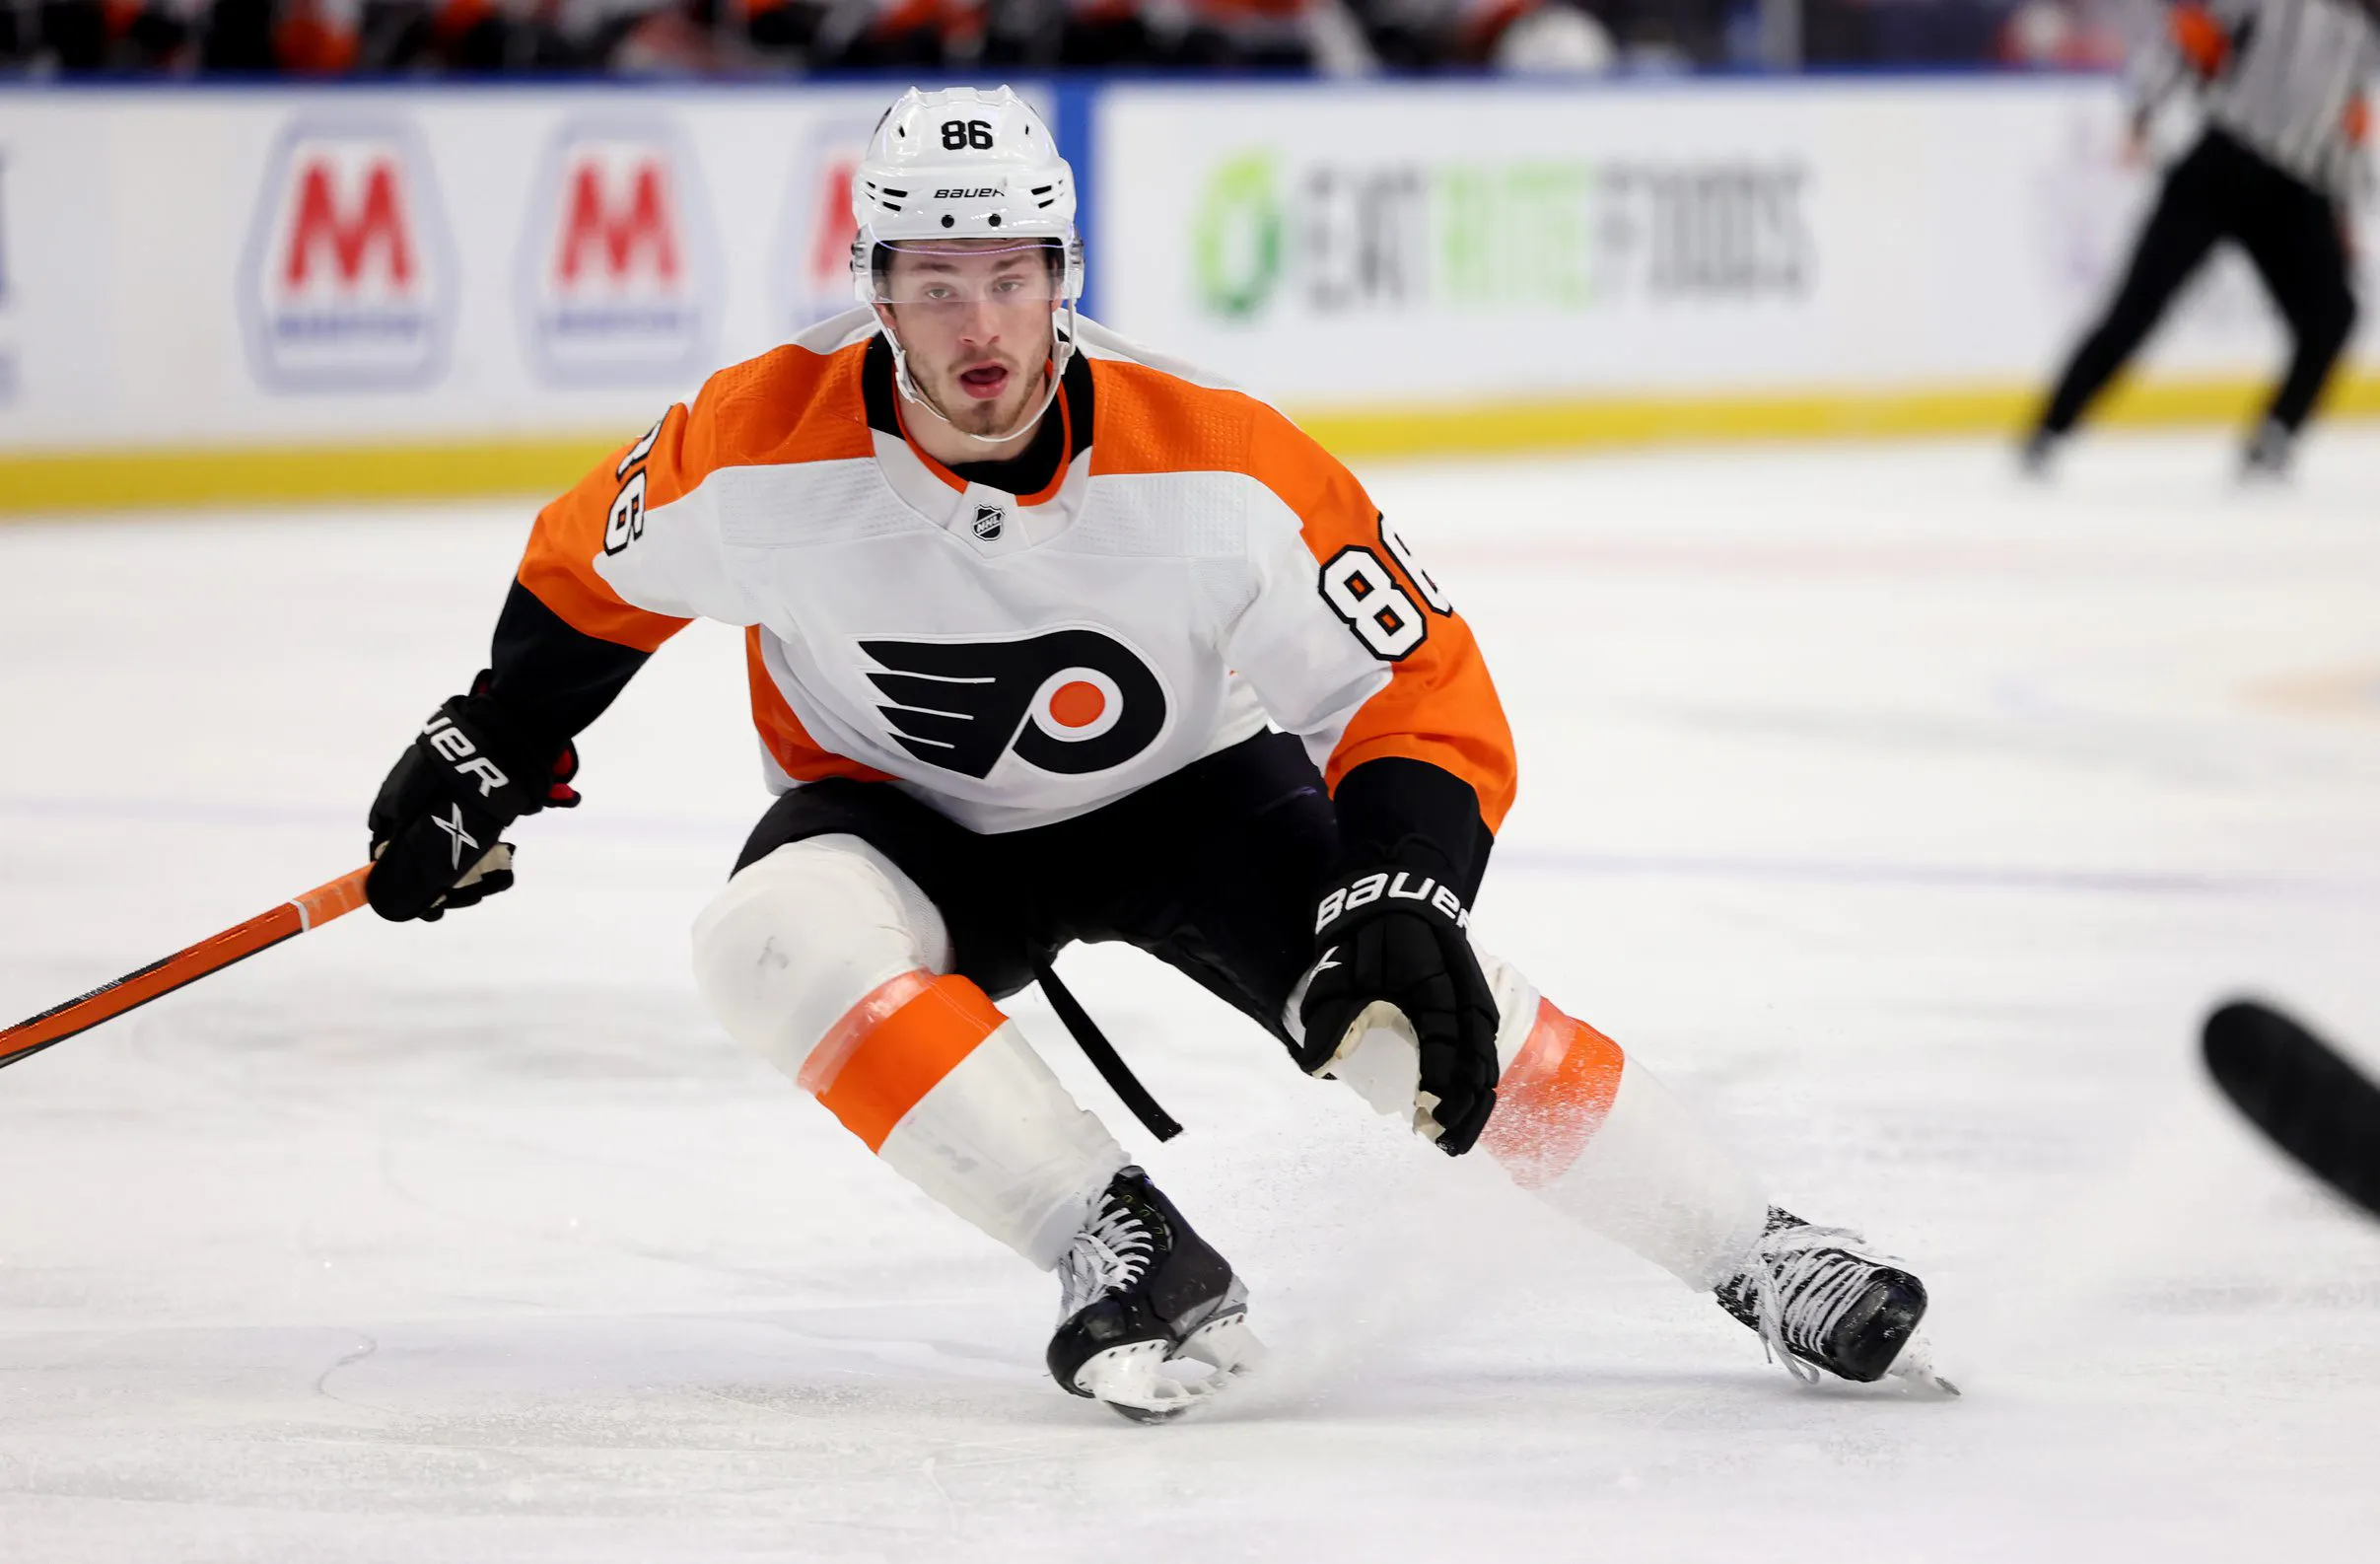 Philadelphia Flyers’ Joel Farabee out 3-4 months after disc replacement surgery